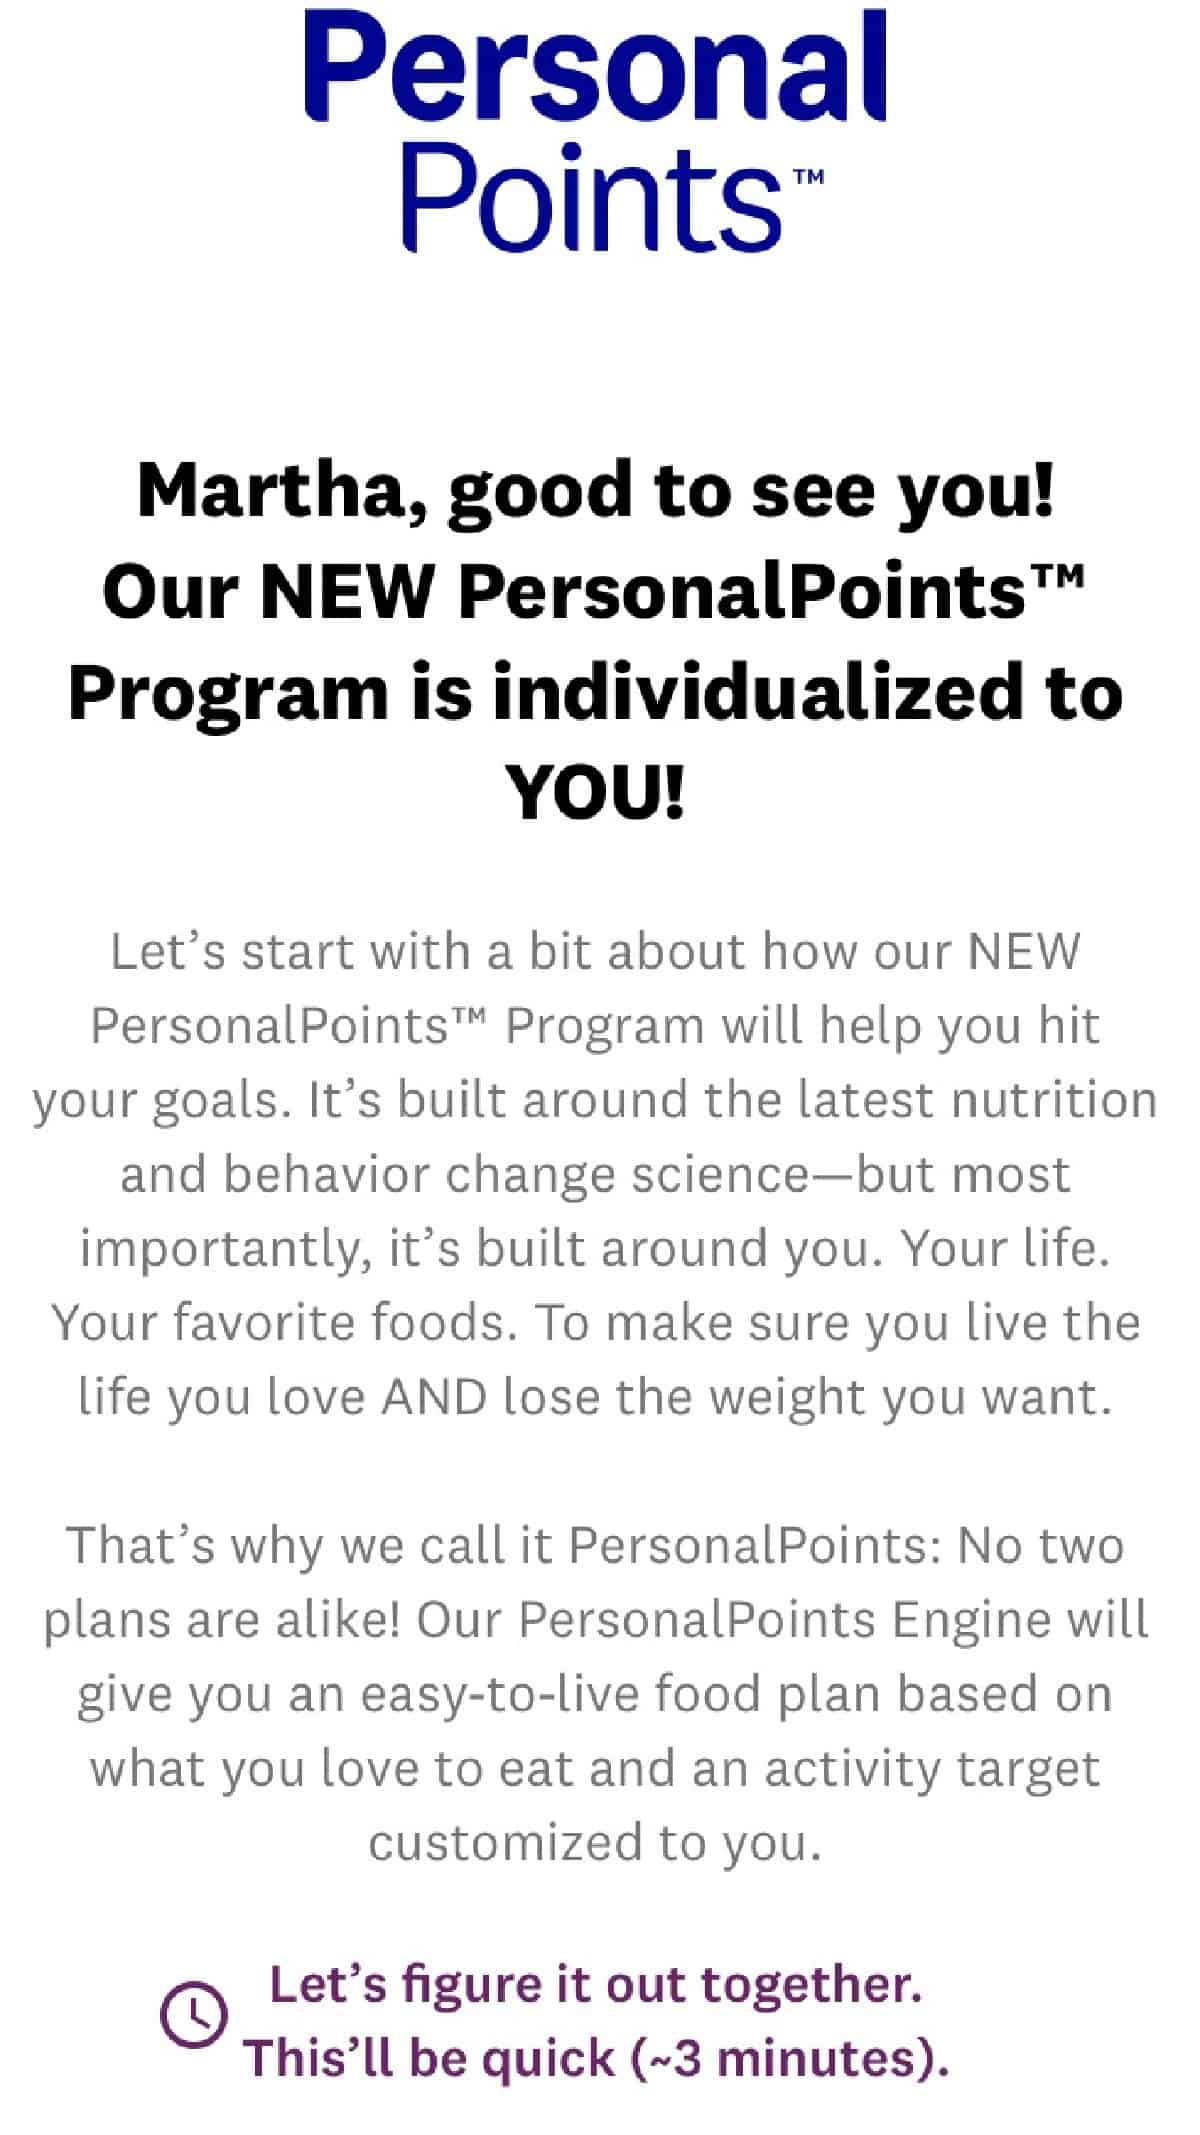 Information about WW new PersonalPoints plan for 2022.